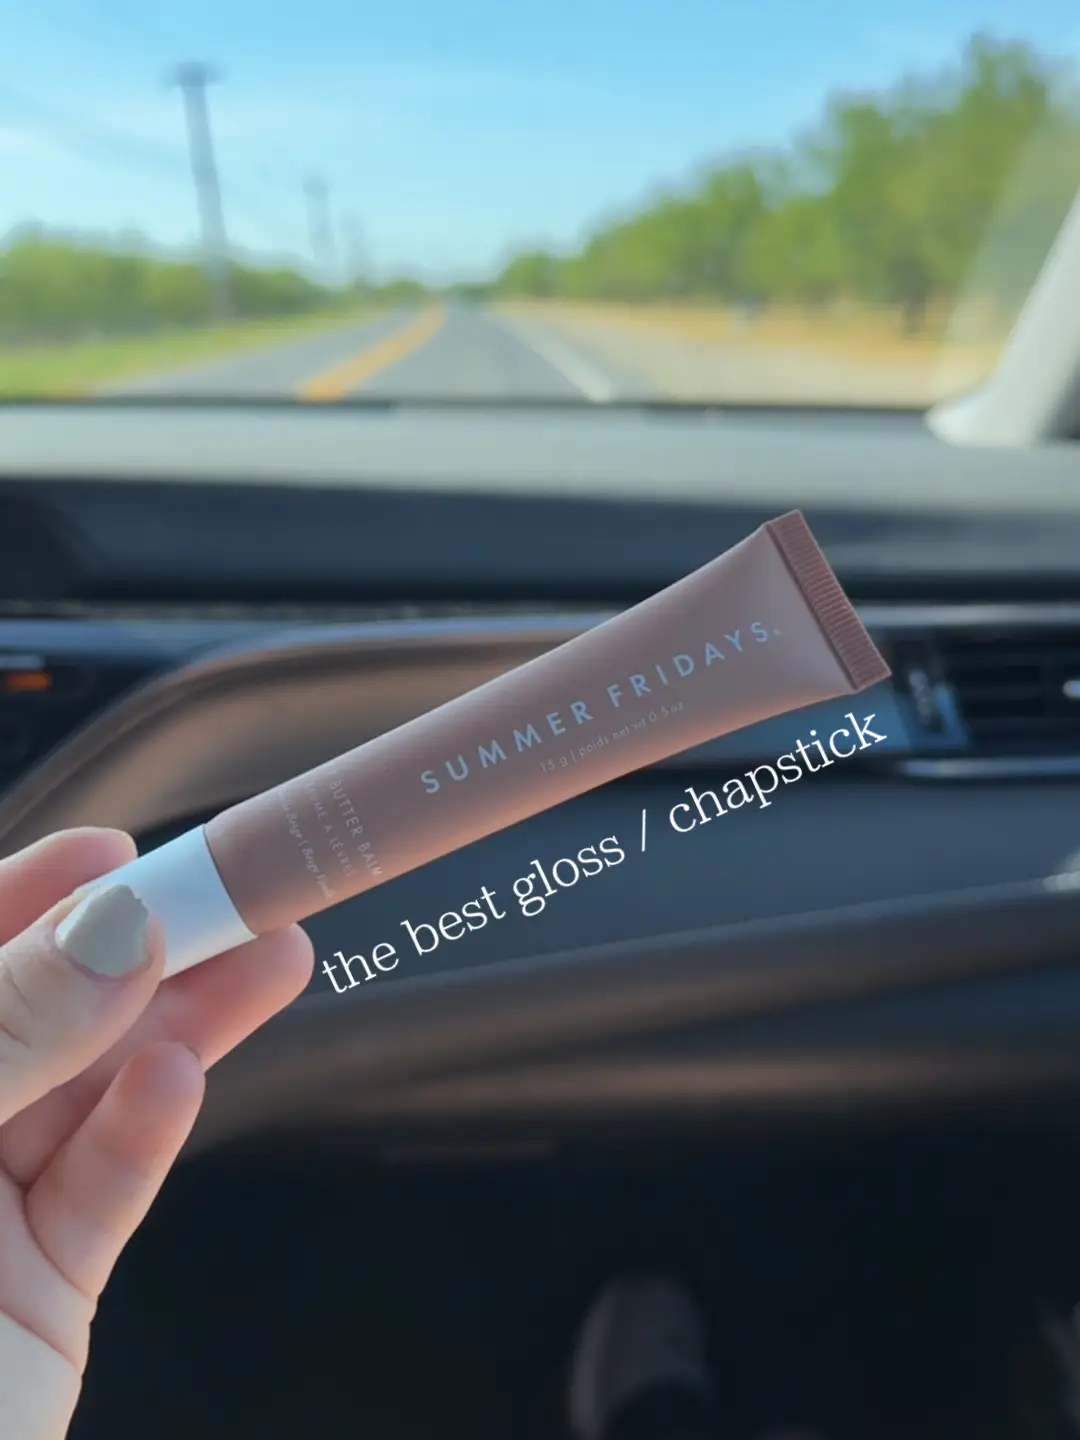 the best gloss / chapstick's images